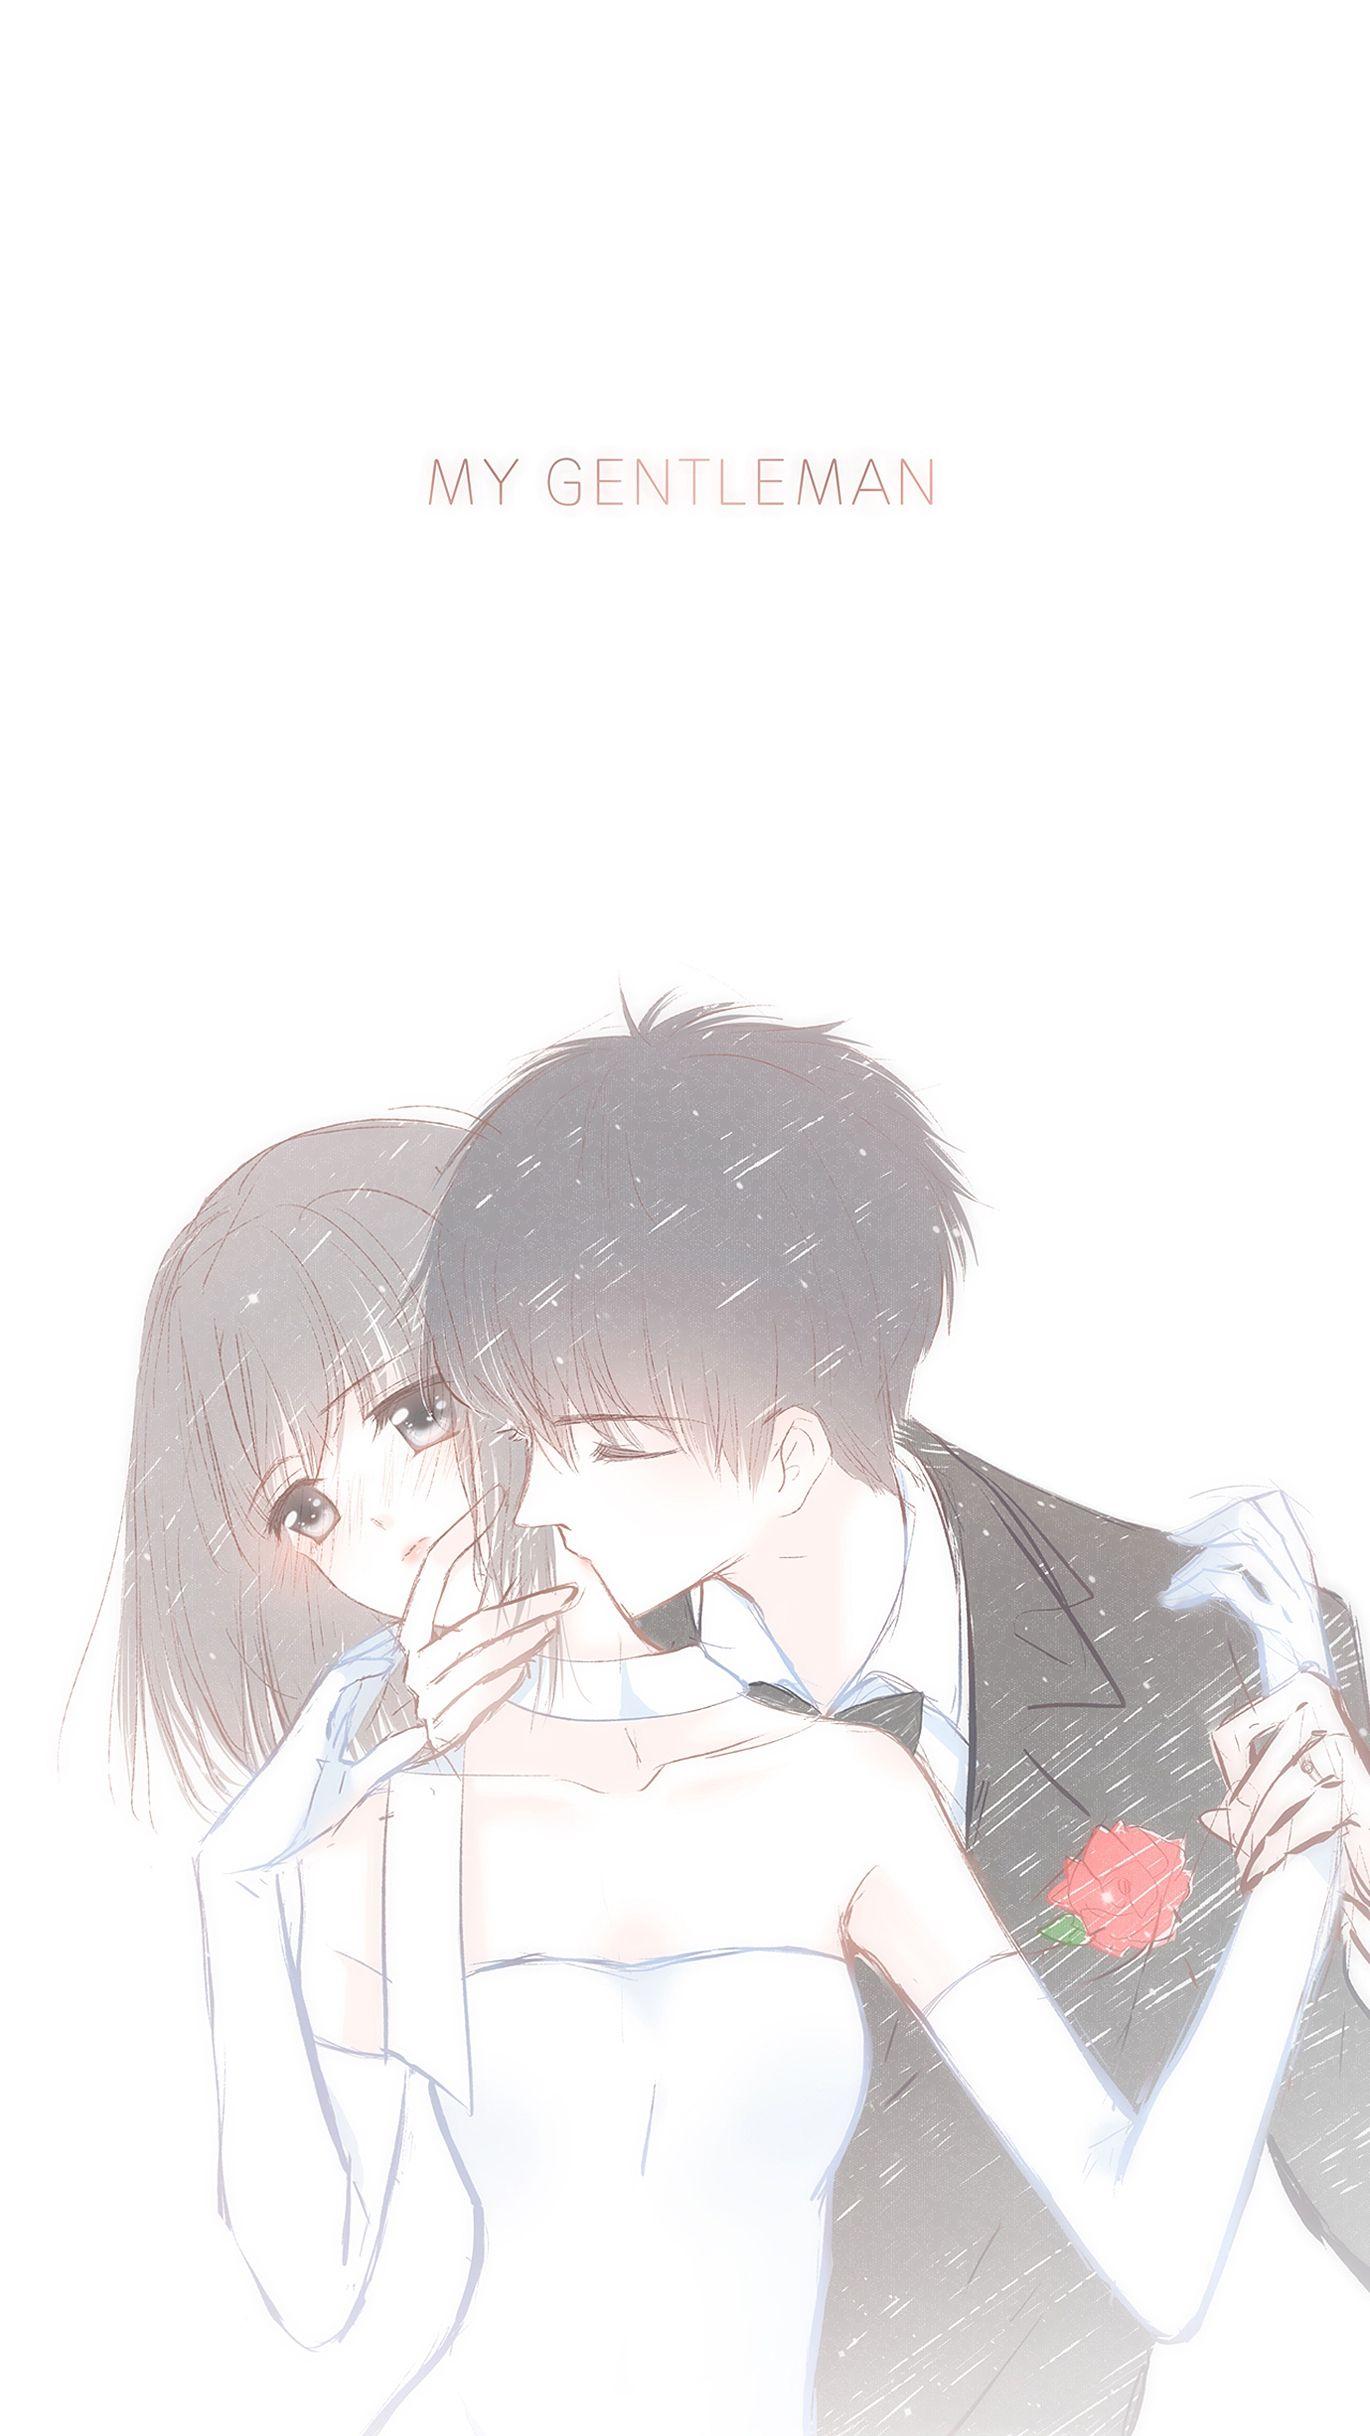 Anime Couple Art Hd Iphone Wallpapers Wallpaper Cave